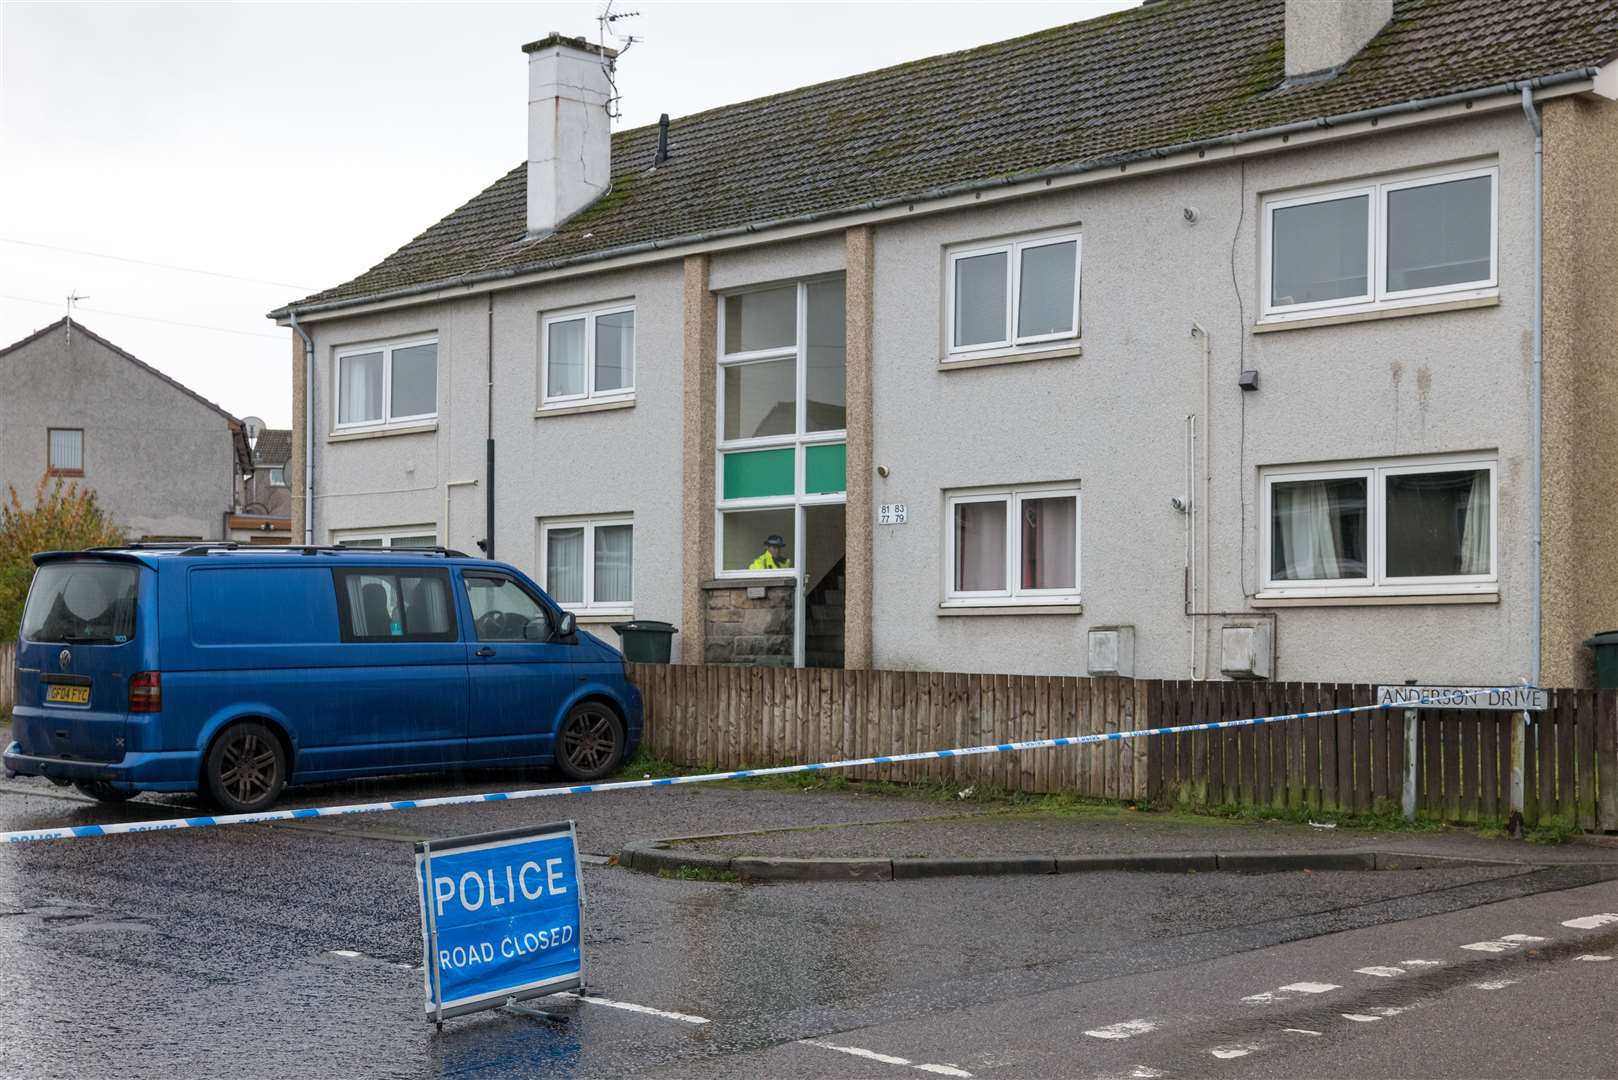 Detectives have launched a murder inquiry following the death of a 32-year-old woman in Elgin on Thursday (November 16). Picture: JasperImage